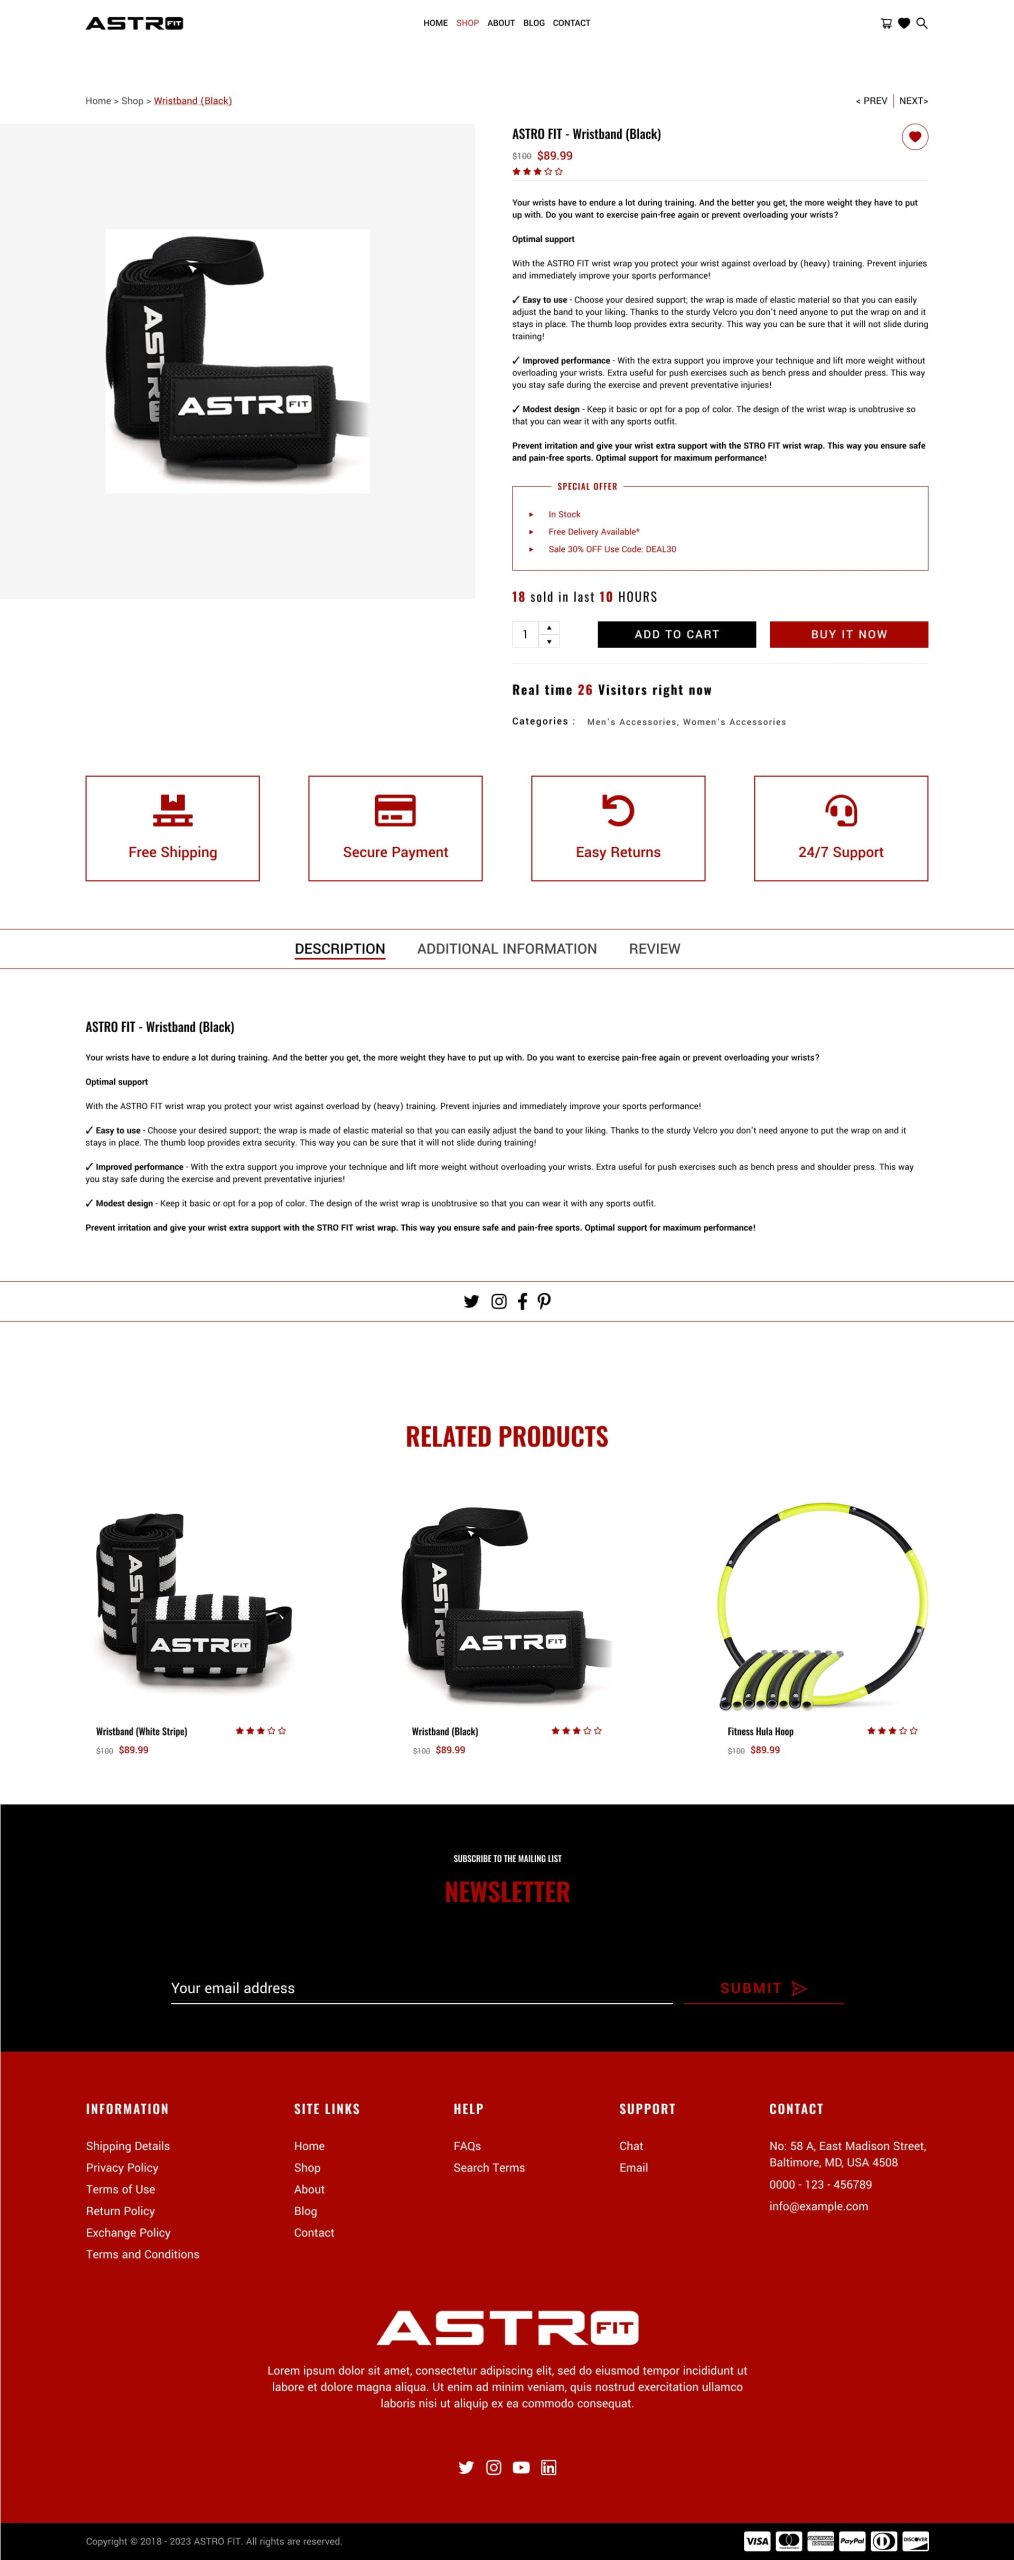 Astro Fit - Product Detail Page